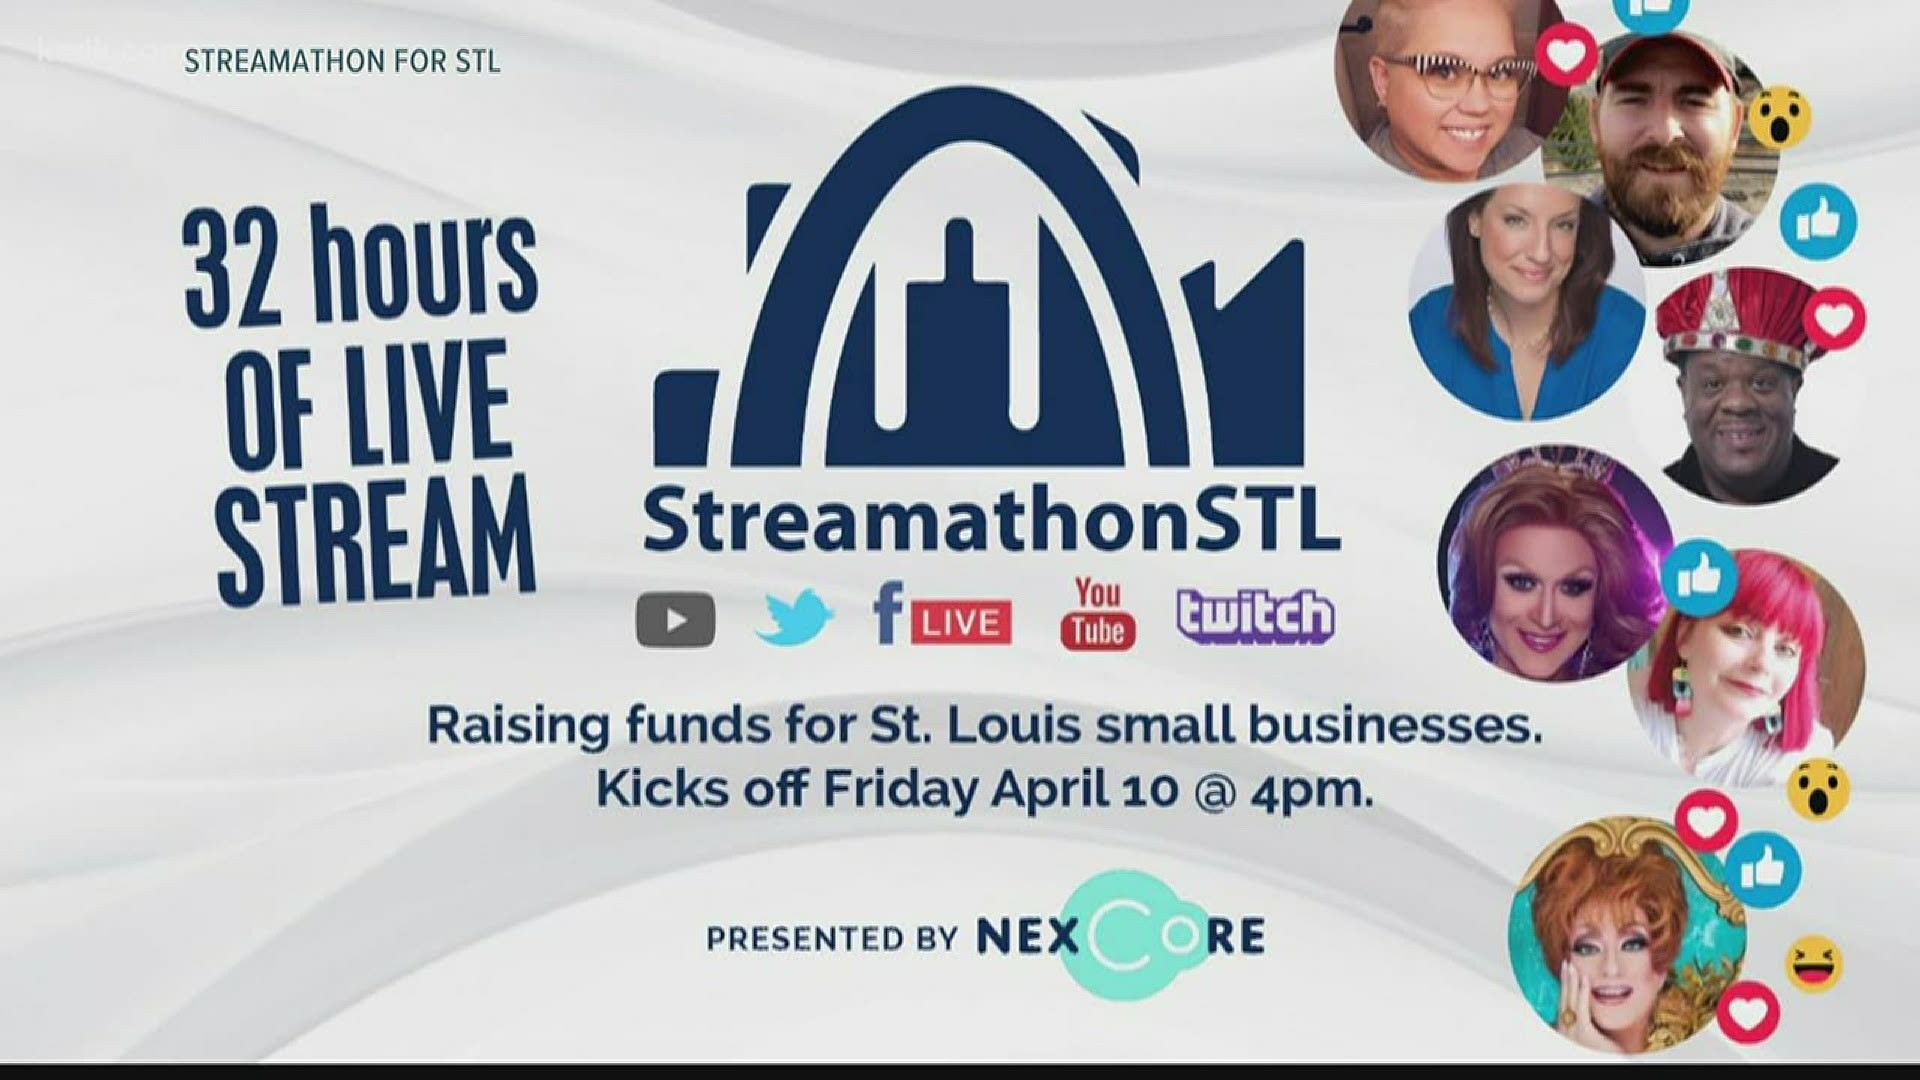 The "streamathon" started at 4 p.m. on Friday and is set to go for 32 hours.